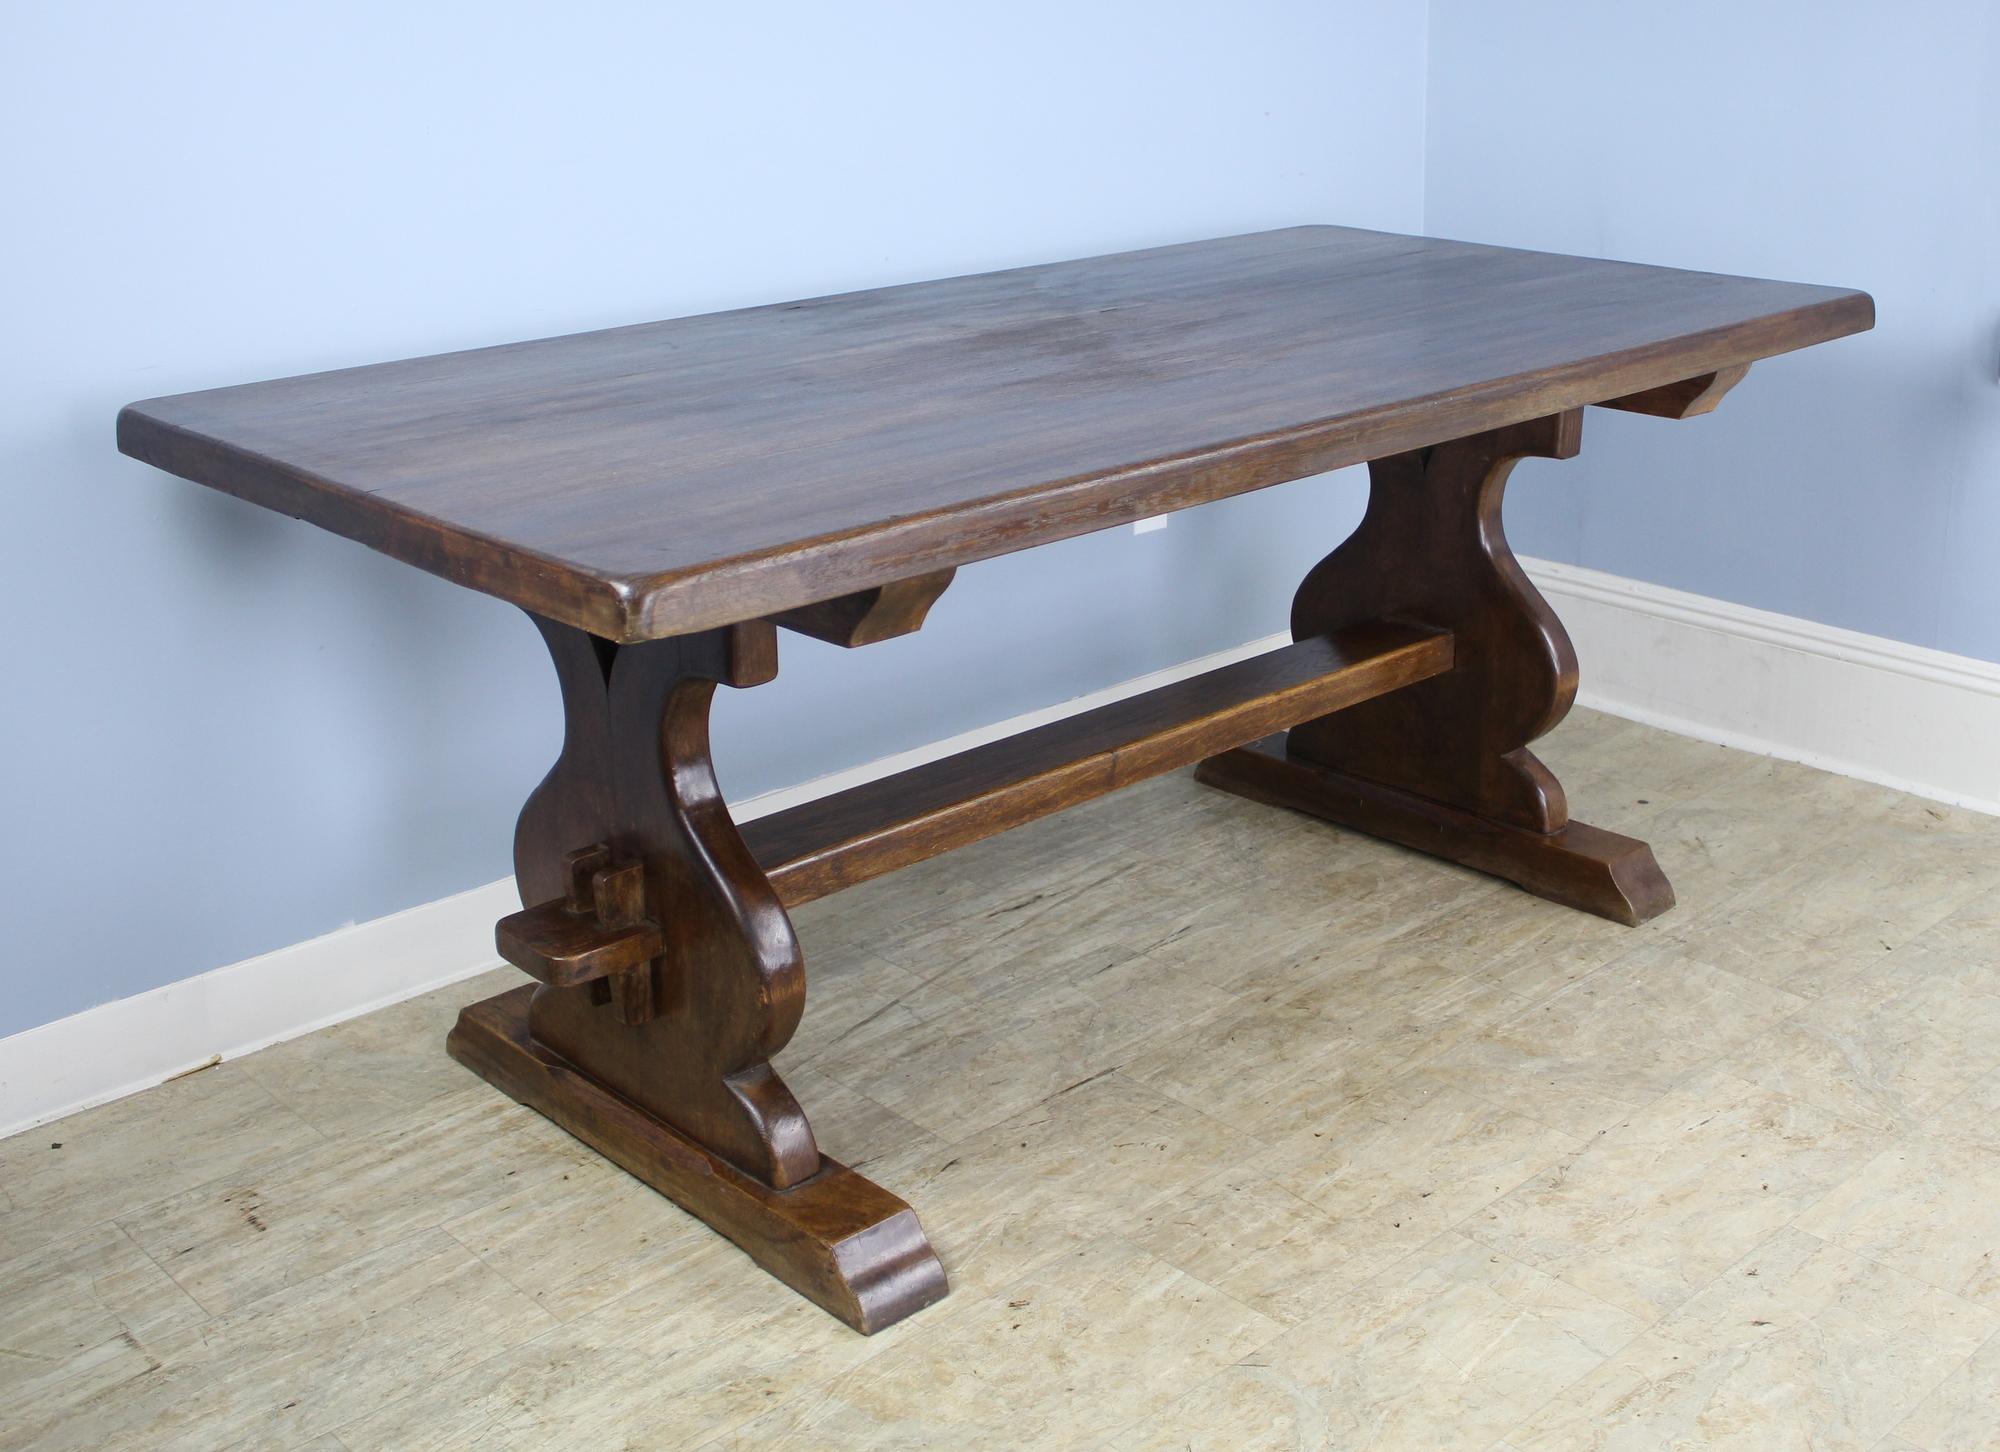 A handsome and beautifully crafted antique French fruitwood refectory table with a 2 inch thick top and marvellous construction and design on the trestle base. With no apron to get in the way, this table can comfortably accommodate eight. Great